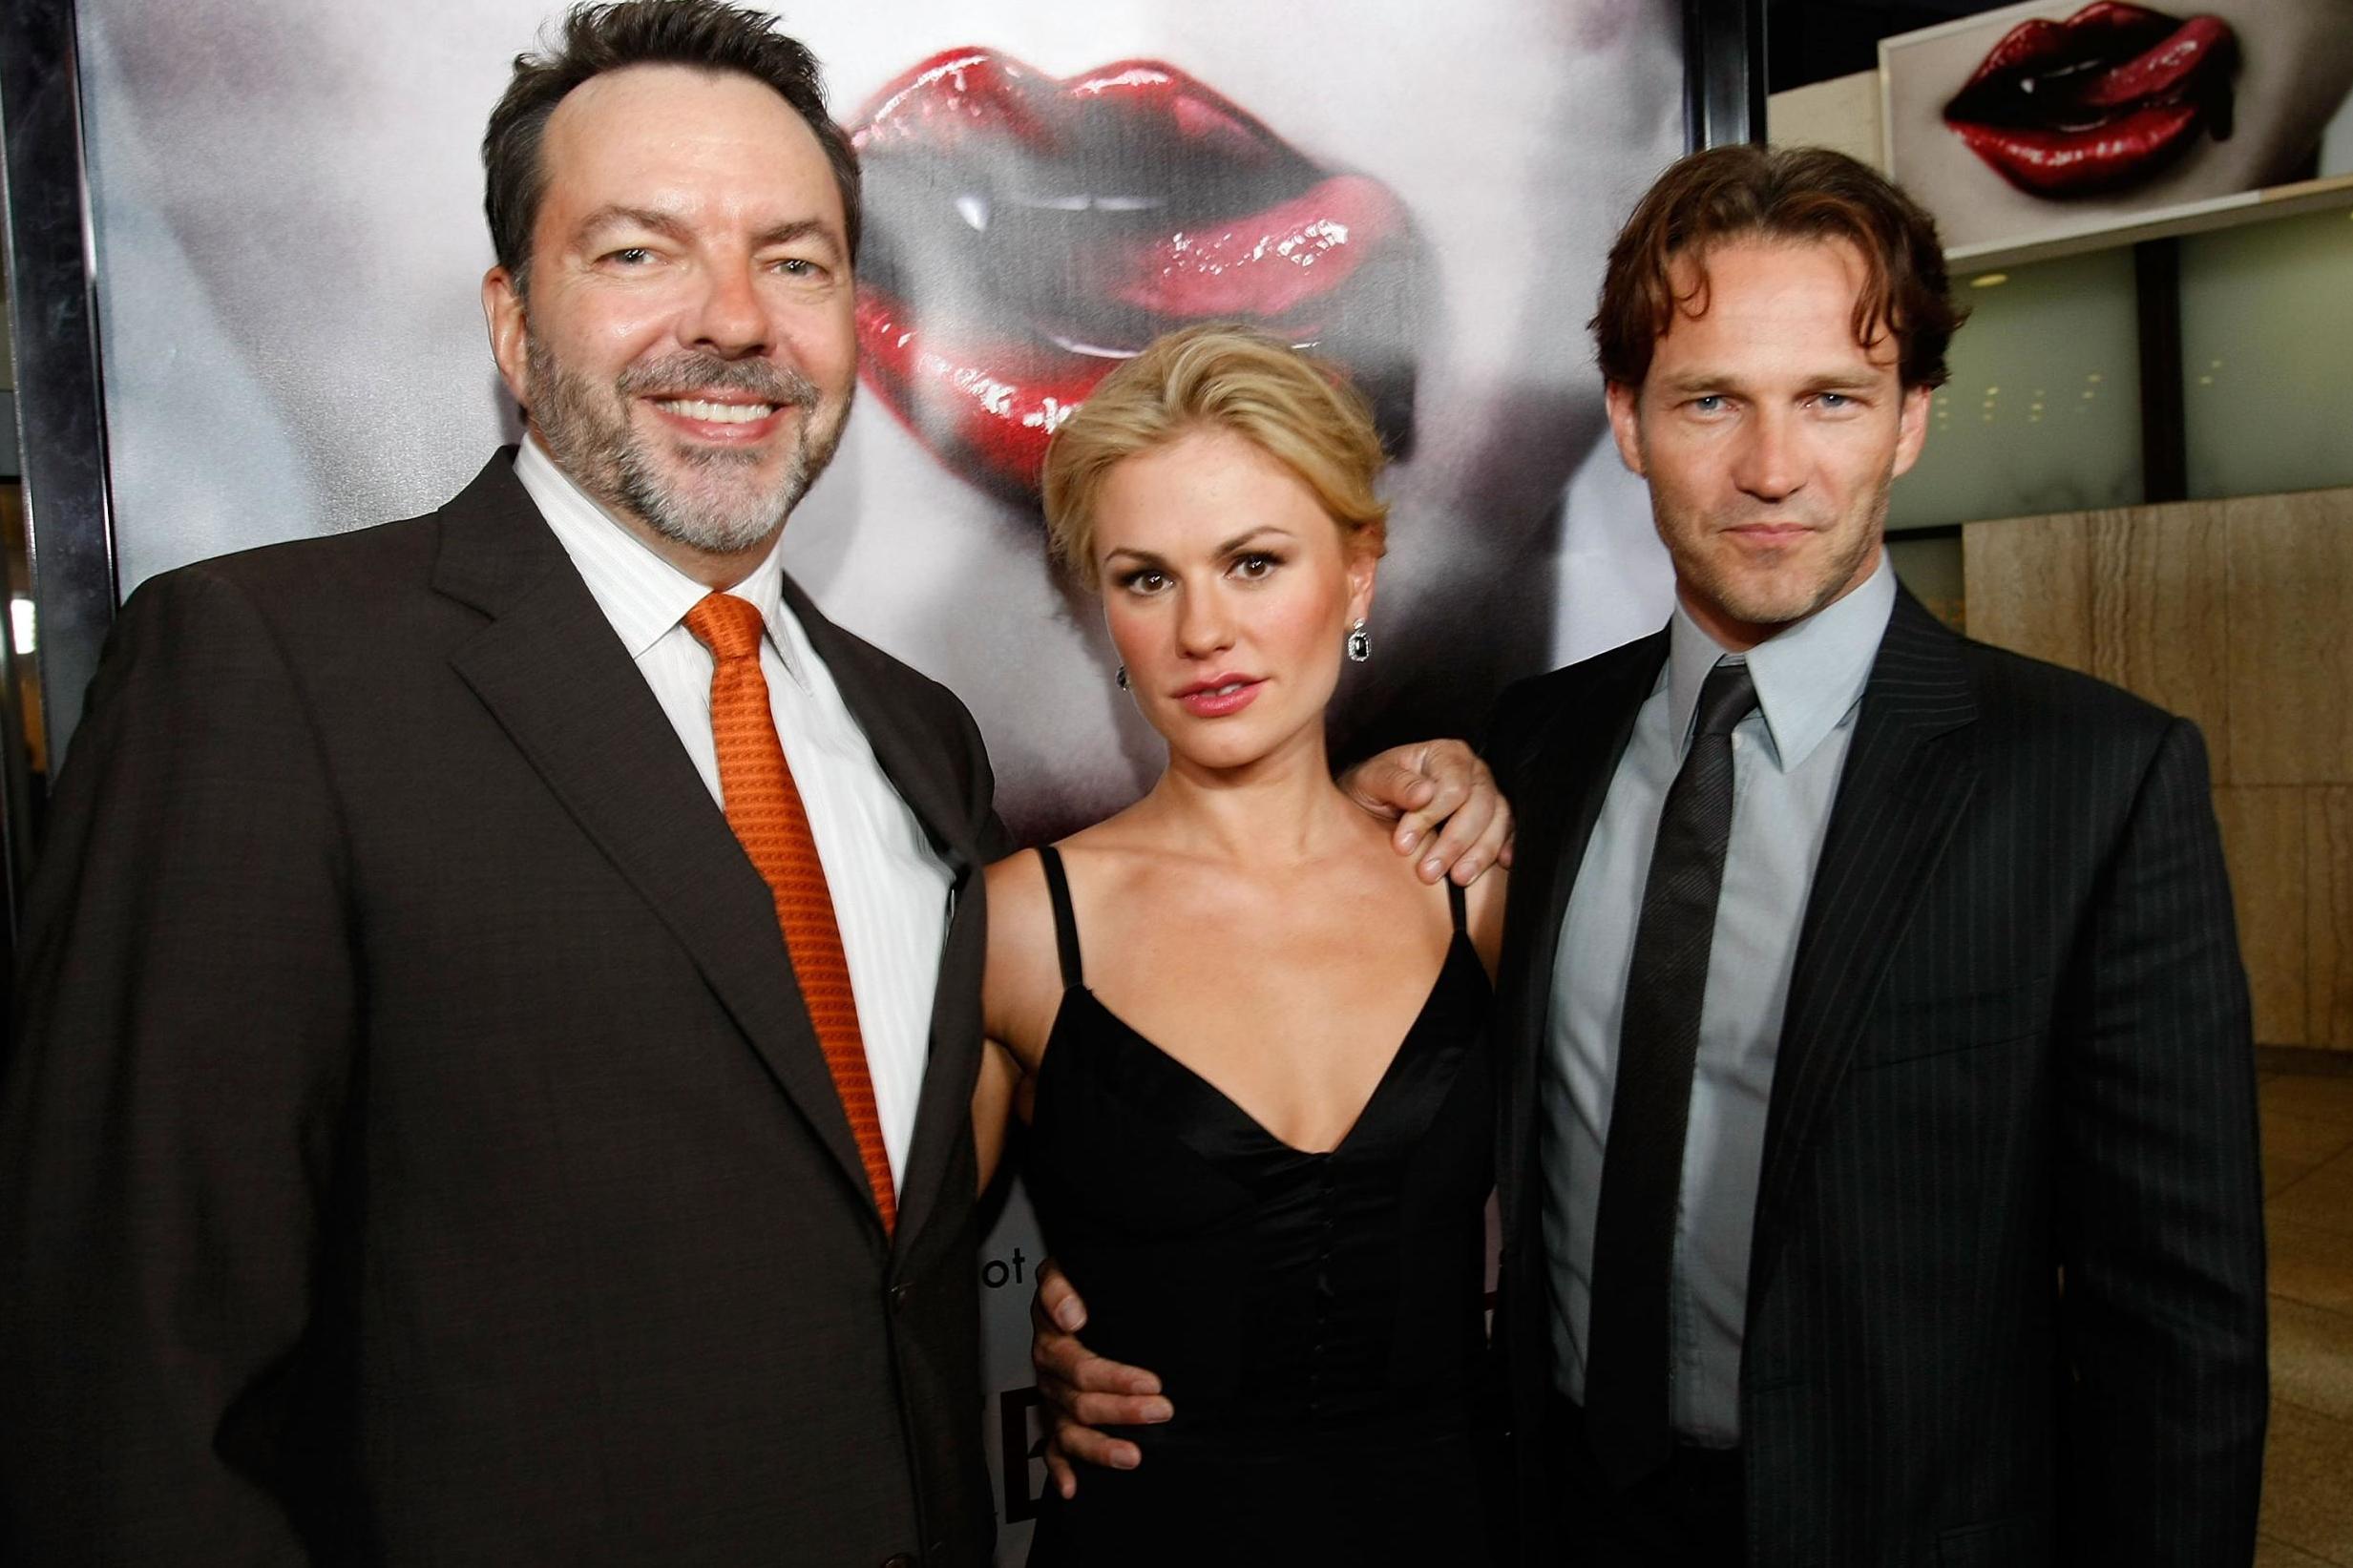 Producer Alan Ball, actress Anna Paquin and actor Stephen Moyer arrive at the Los Angeles Premiere of HBO's Series True Blood at the Cinerama Dome on 4 September, 2008 in Hollywood, California.